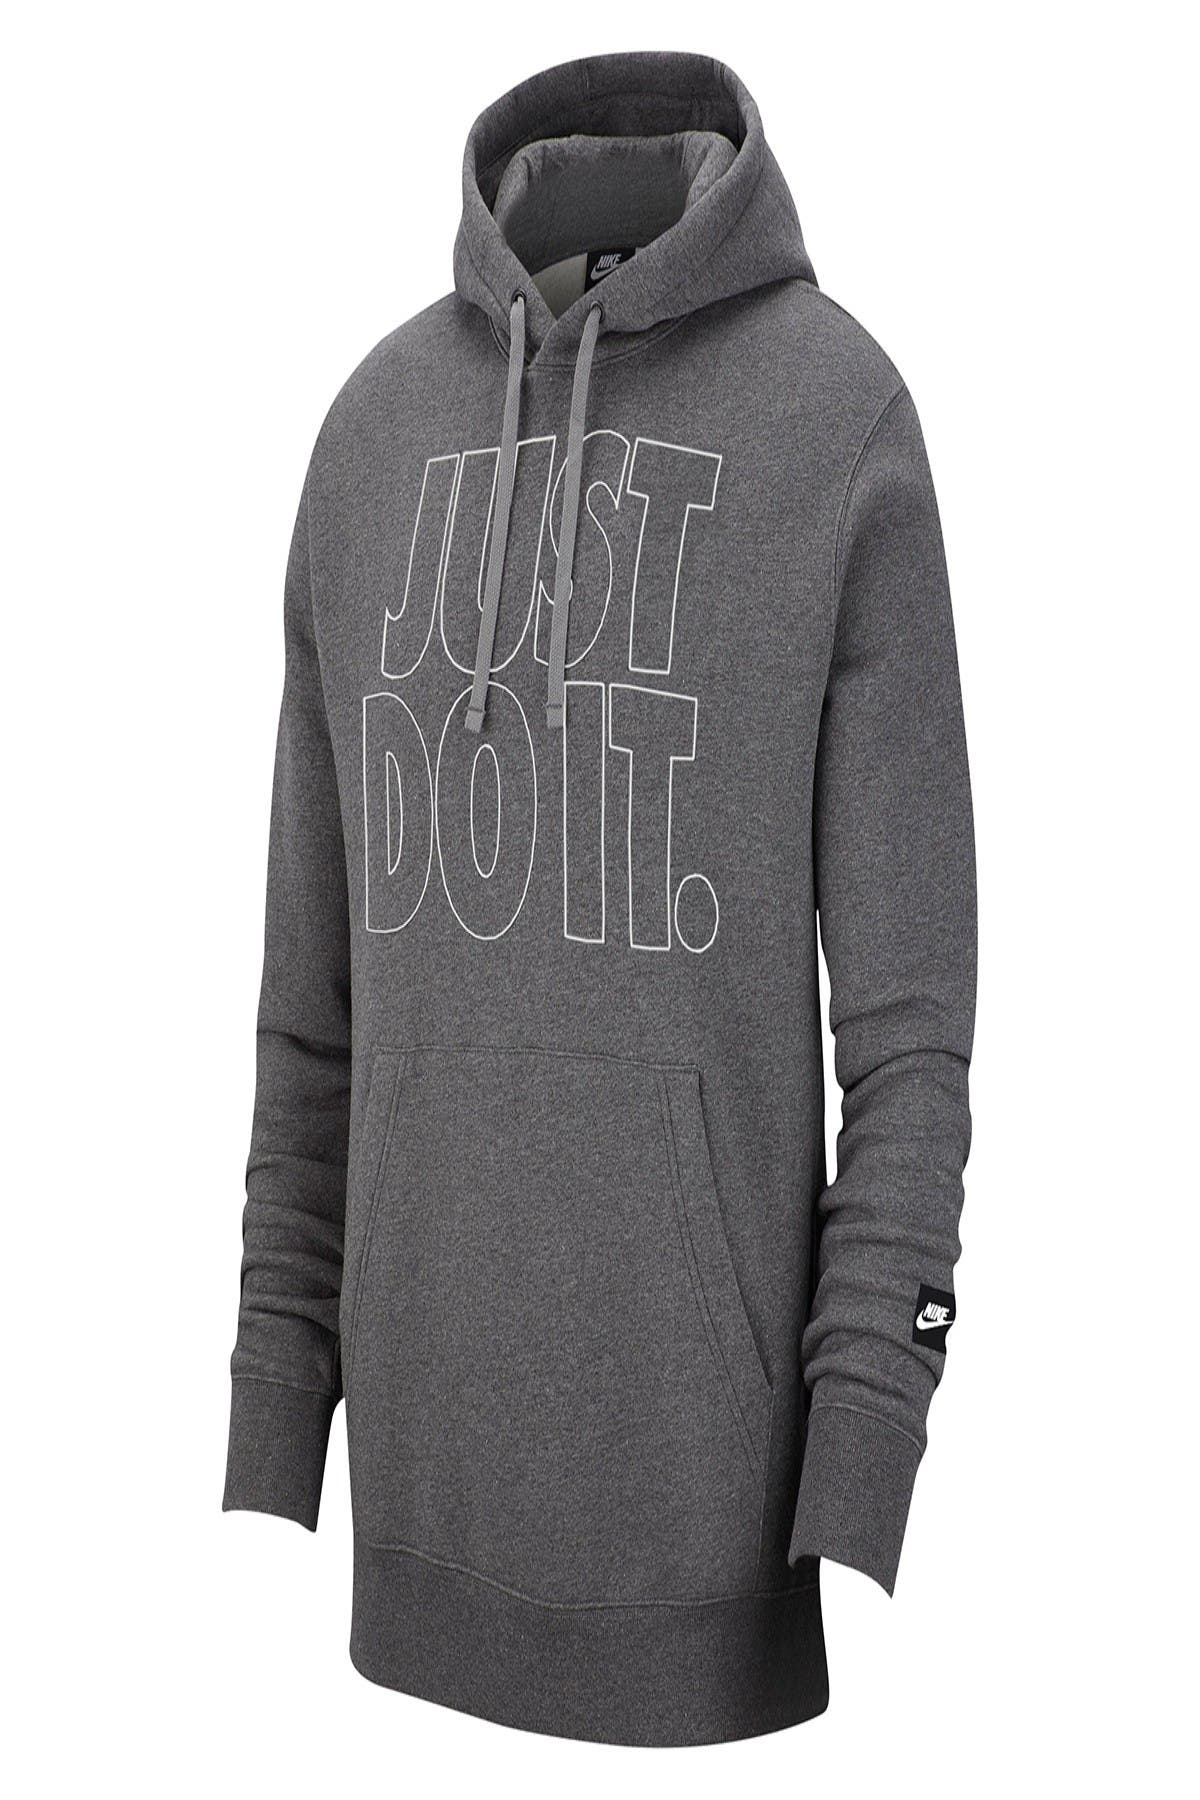 nike white hoodie just do it